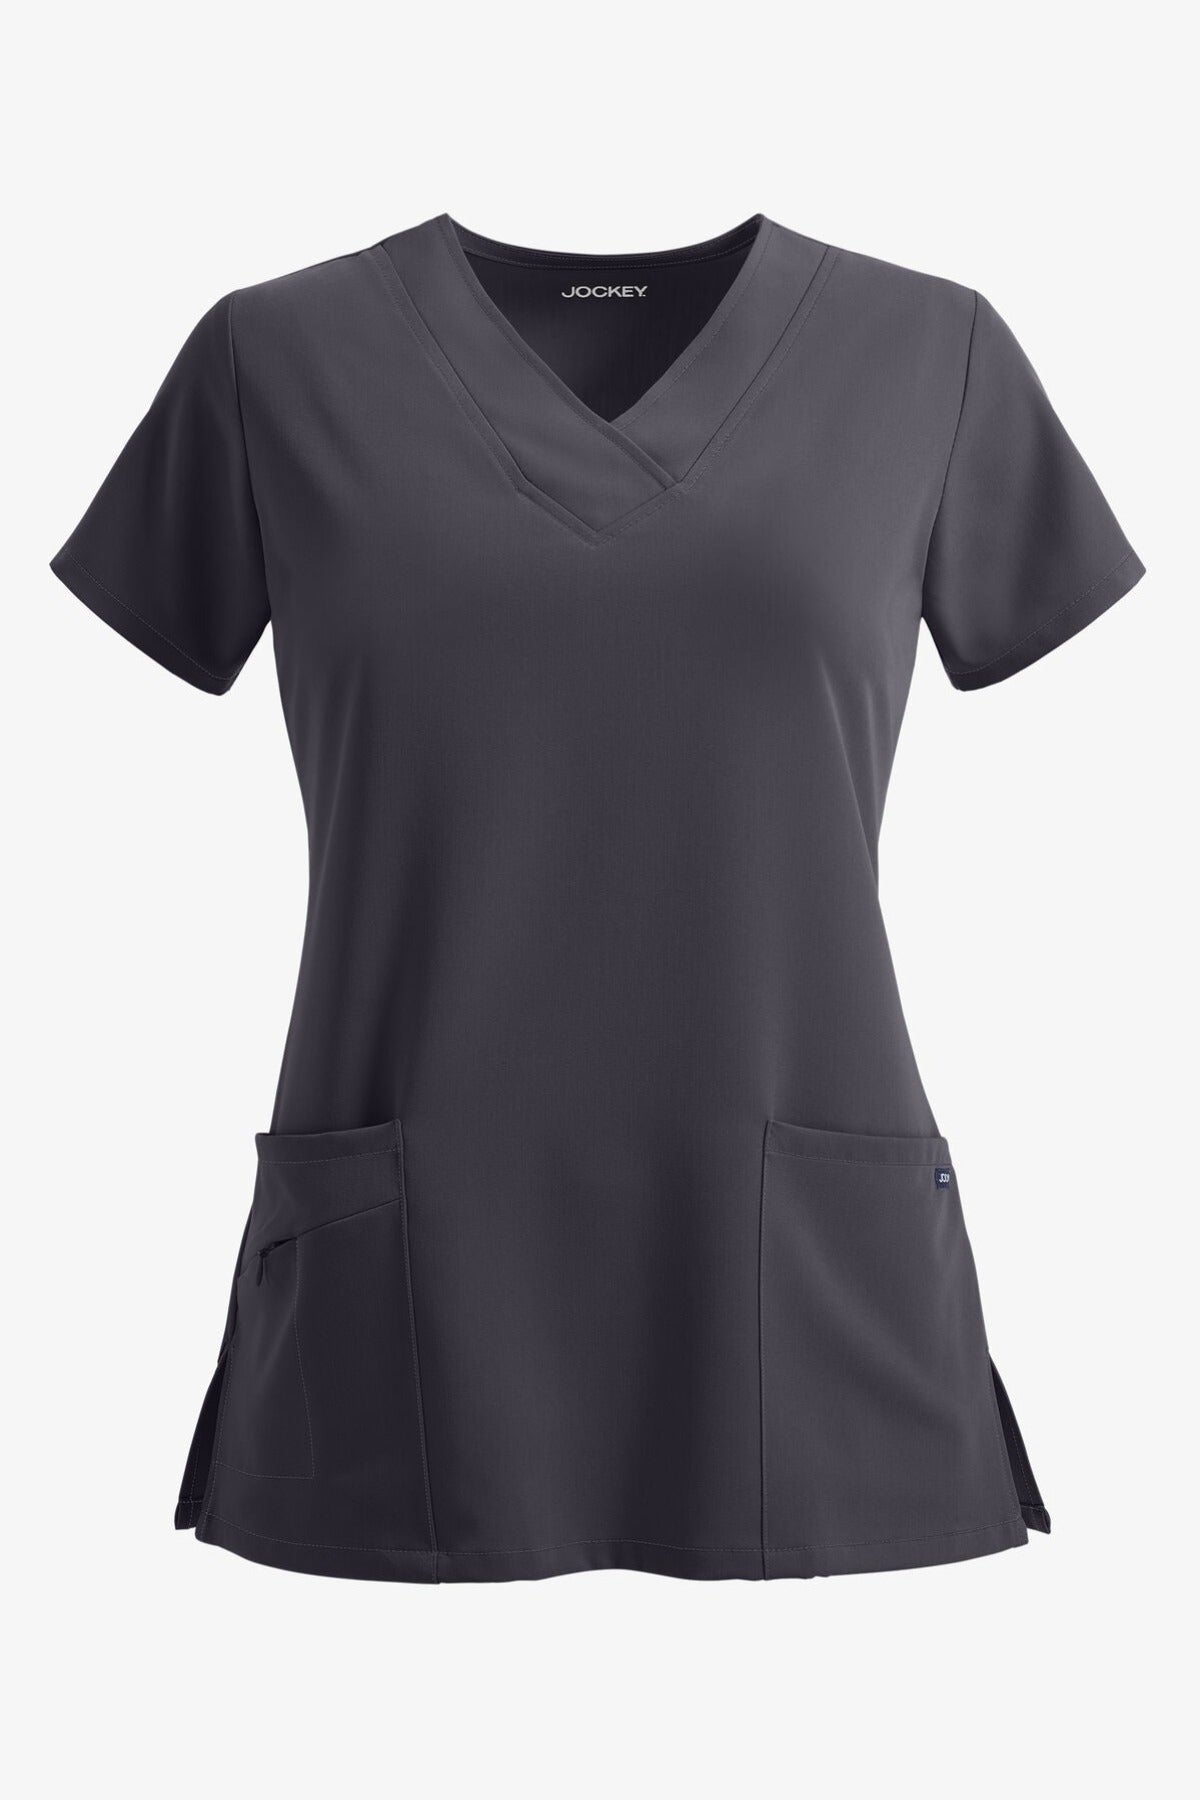 Jockey Scrub Top Classic V Neck in Charcoal at Parker's Clothing and Shoes.